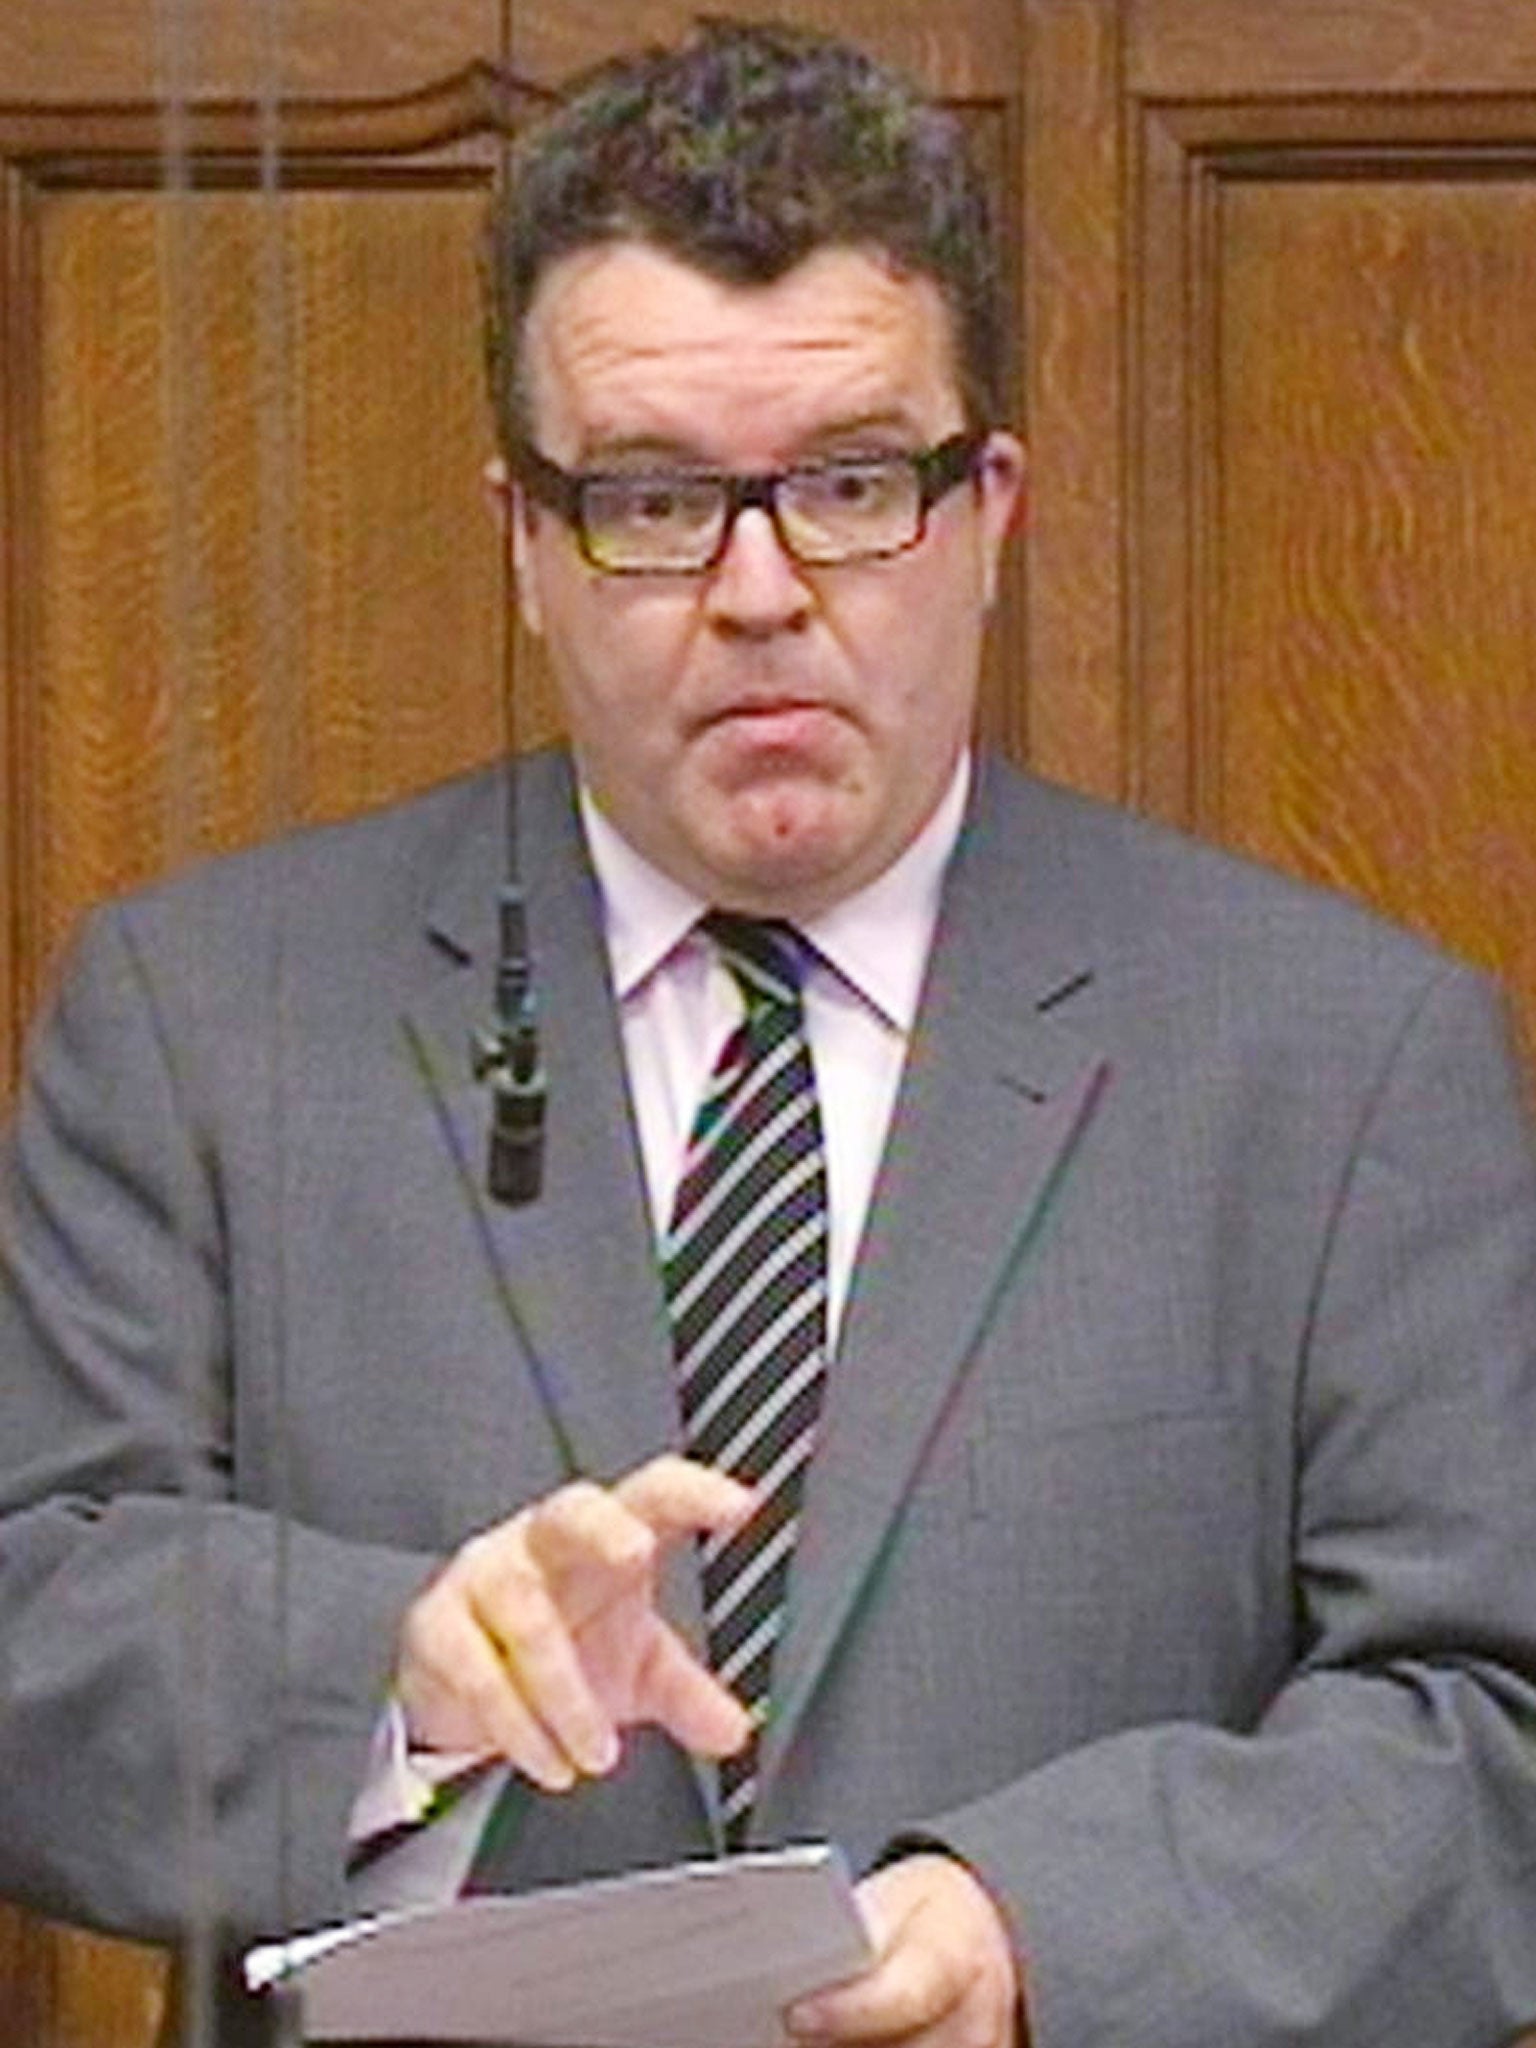 Tom Watson says the living wage should become party policy